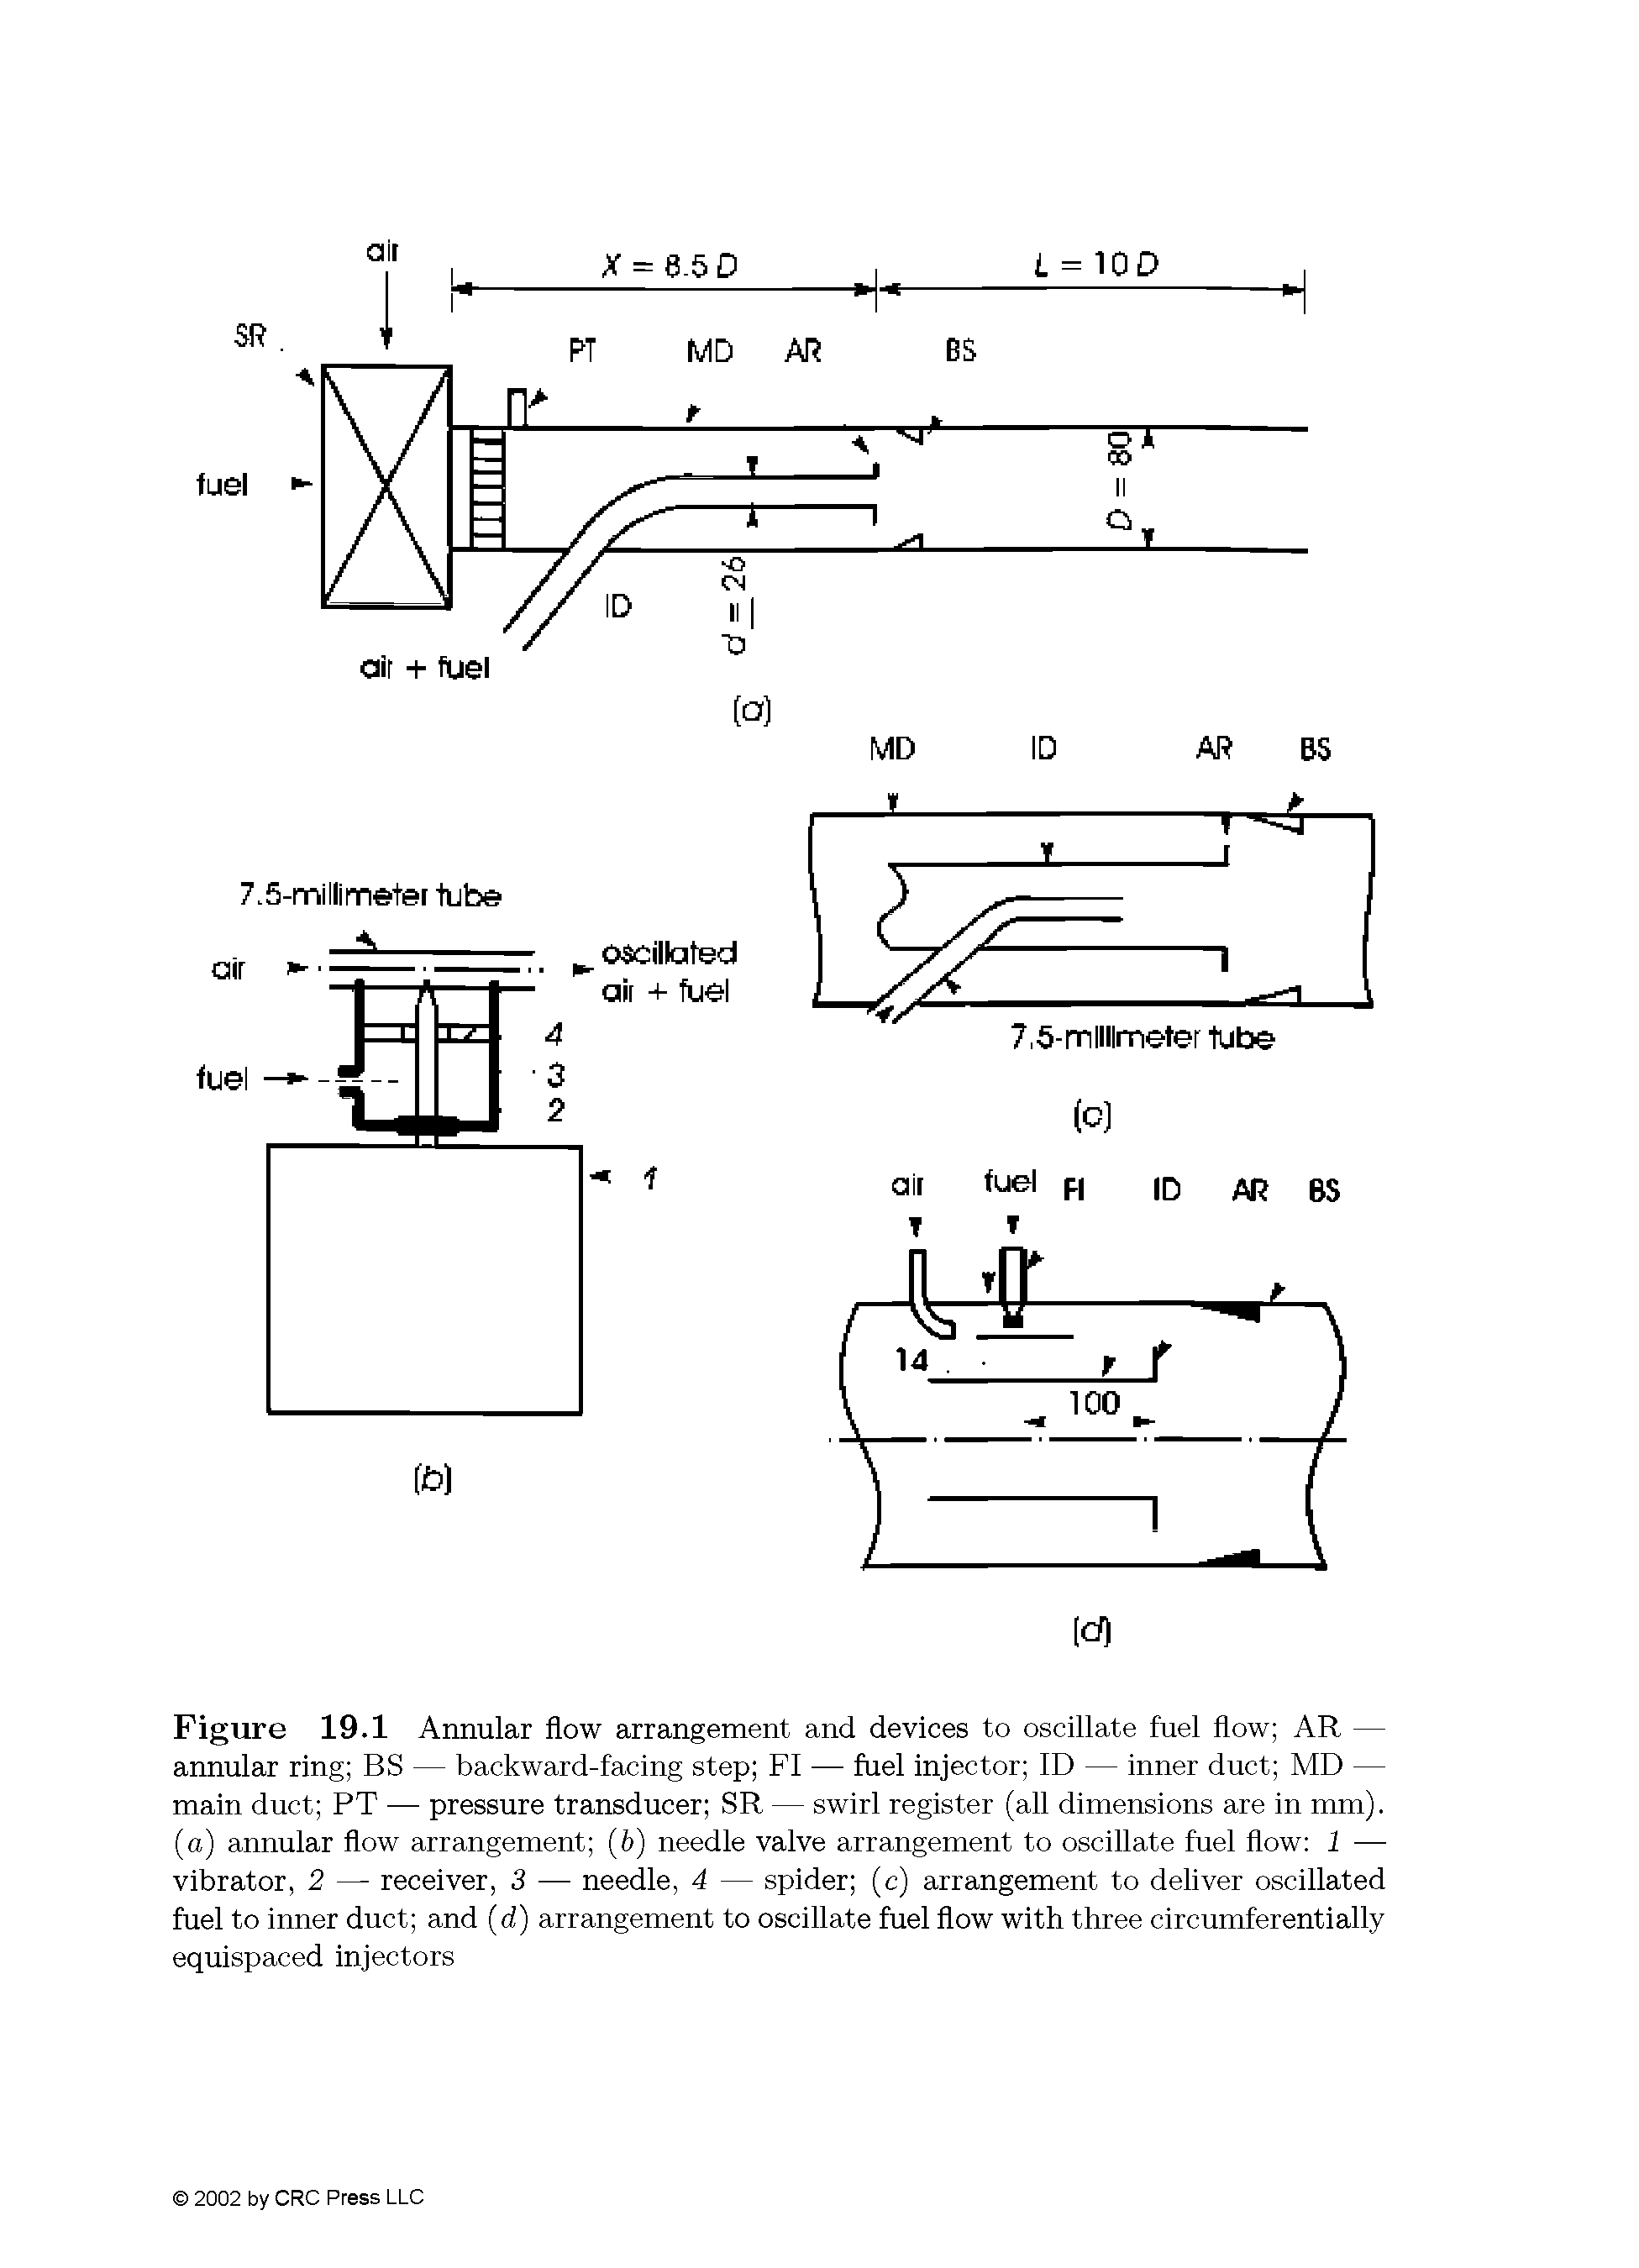 Figure 19.1 Annular flow arrangement and devices to oscillate fuel flow AR — annular ring BS — backward-facing step FI — fuel injector ID — inner duct MD — main duct PT — pressure transducer SR — swirl register (all dimensions are in mm), (a) annular flow arrangement (6) needle valve arrangement to oscillate fuel flow 1 — vibrator, 2 — receiver, 3 — needle, 4 — spider (c) arrangement to deliver oscillated fuel to inner duct and (d) arrangement to oscillate fuel flow with three circumferentially equispaced injectors...